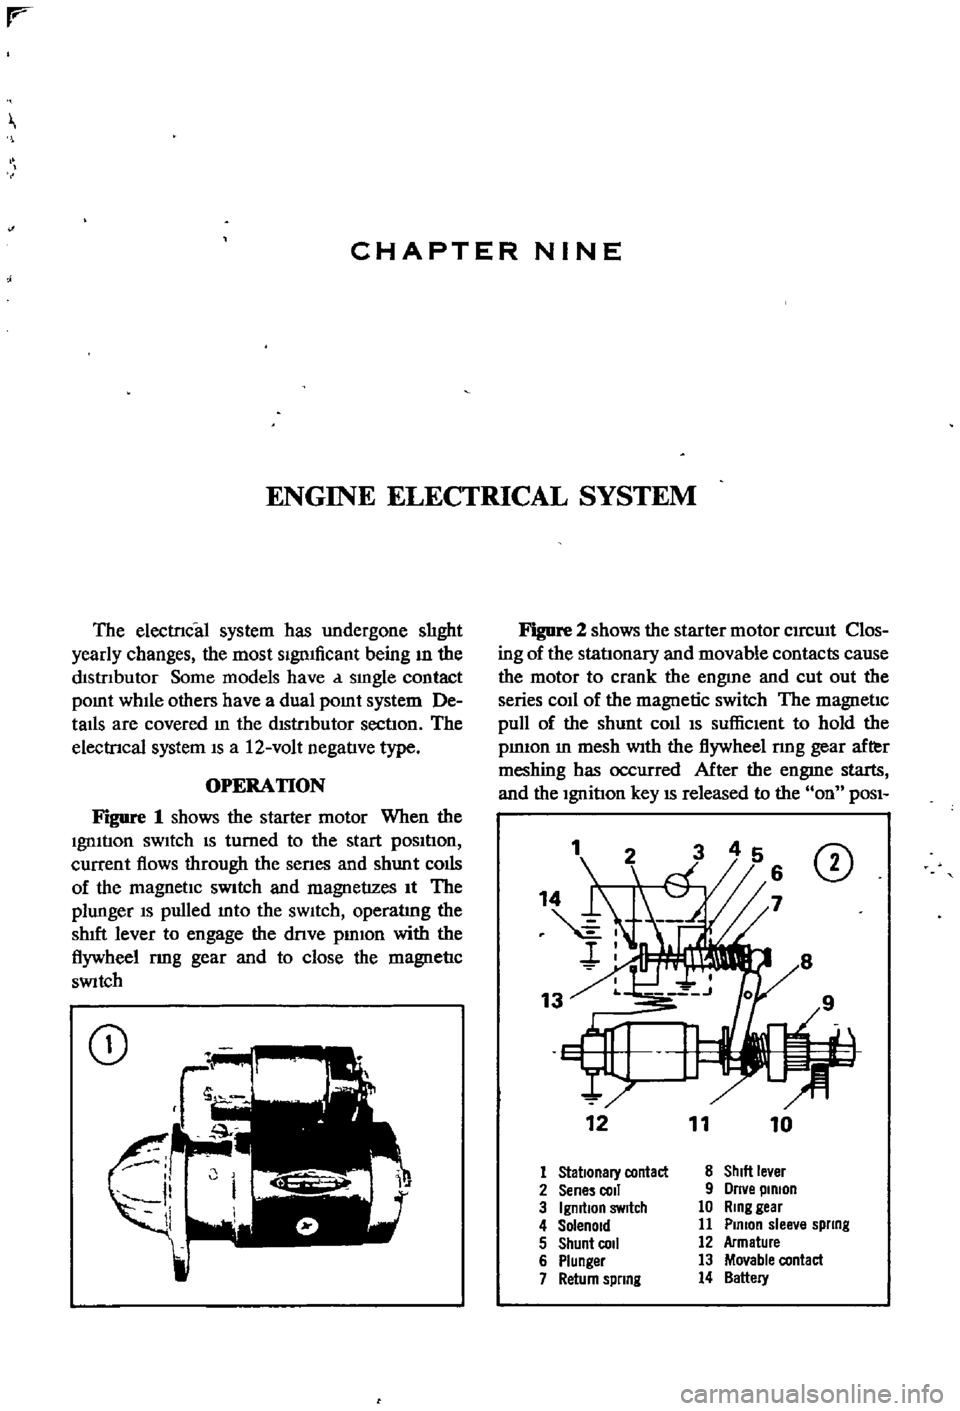 DATSUN 510 1968  Service Repair Manual 
CHAPTER

NINE

ENGINE 
ELECTRICAL 
SYSTEM

The 
electrIcal

system 
has

undergone 
slIght

yearly 
changes 
the 
most

SignIficant 
being 
ill 
the

distrIbutor 
Some 
models 
have 
a

smgle 
contac